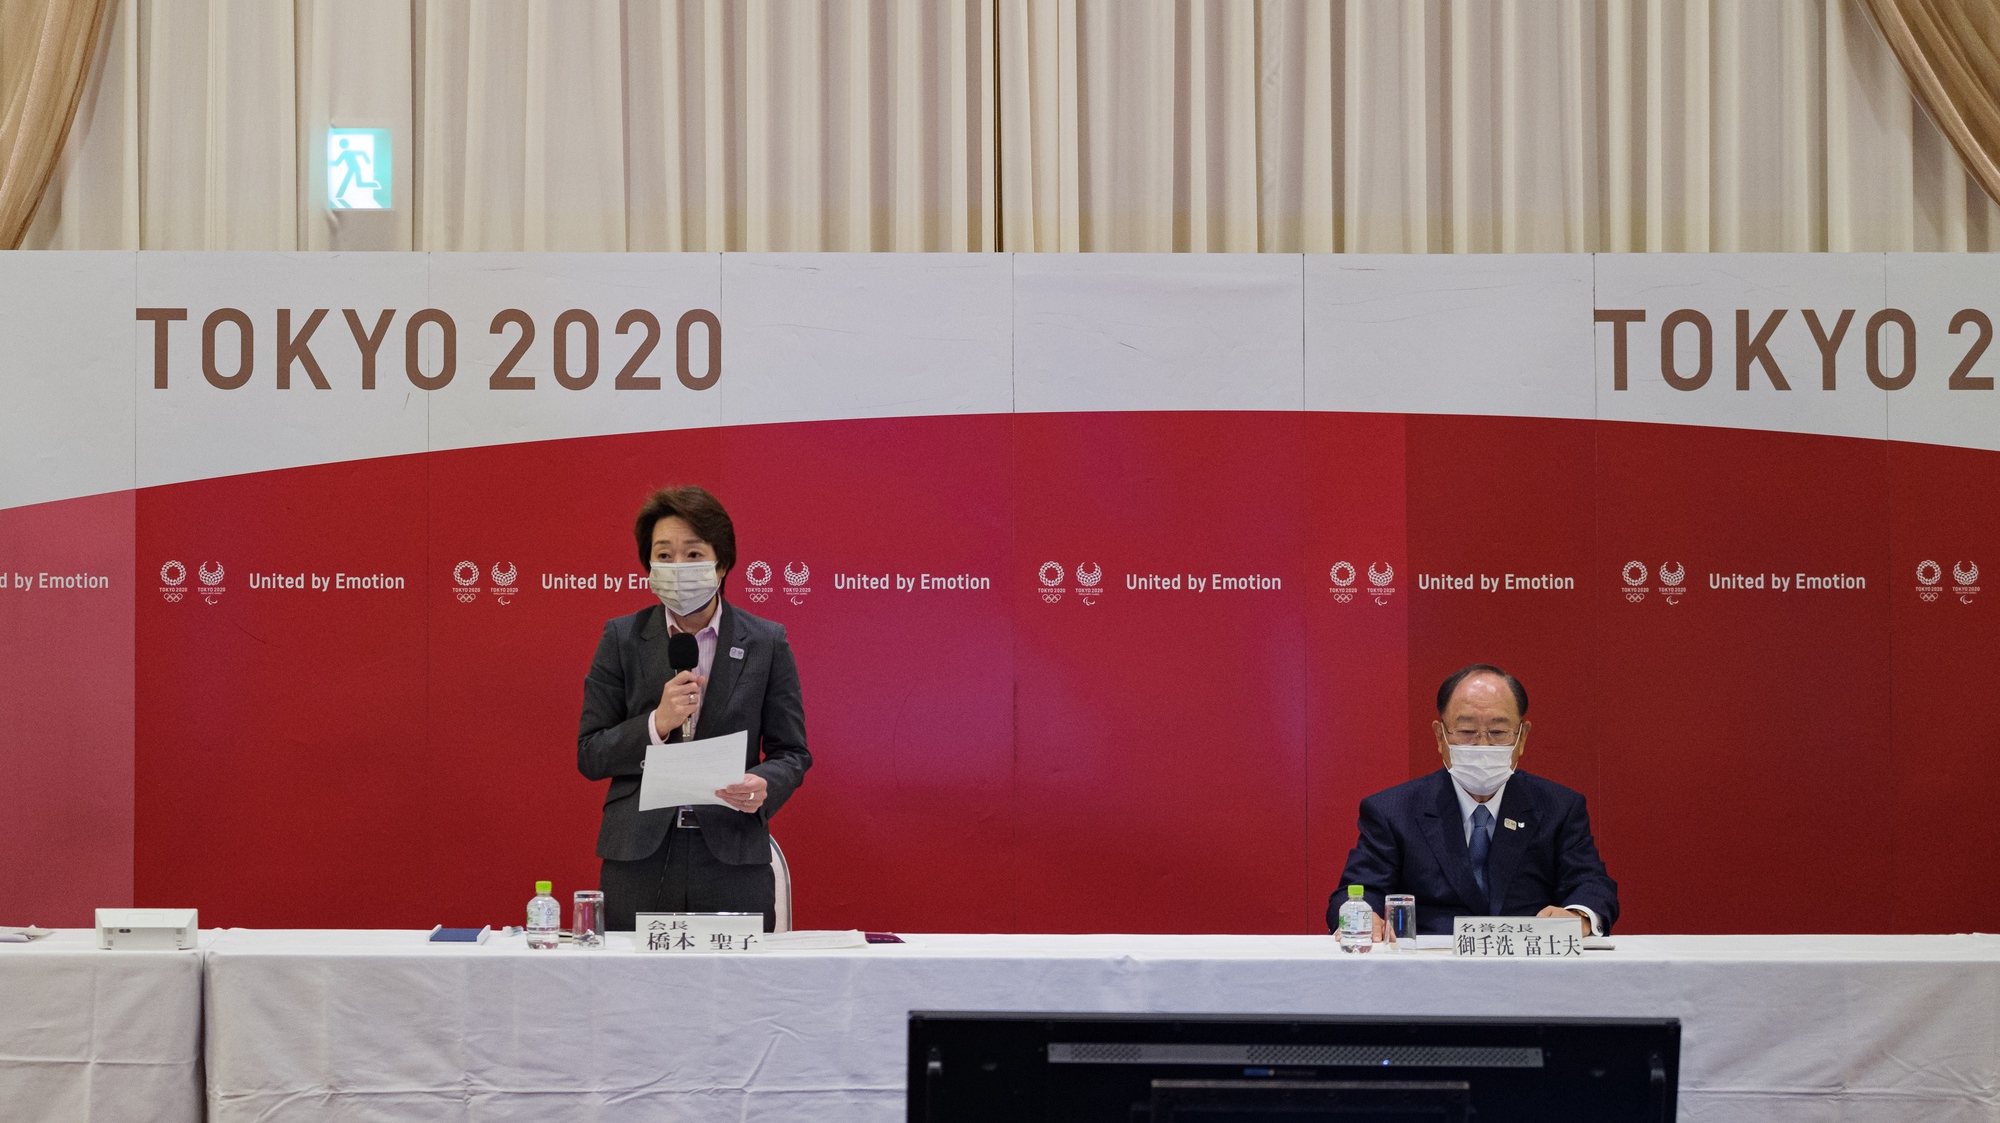 epa09161203 President of the Tokyo 2020 Organizing Committee of the Olympic and Paralympic games Seiko Hashimoto (L) delivers an opening speech during a Tokyo 2020 executive board meeting in Tokyo, Japan, 26 April 2021.  EPA/NICOLAS DATICHE / POOL